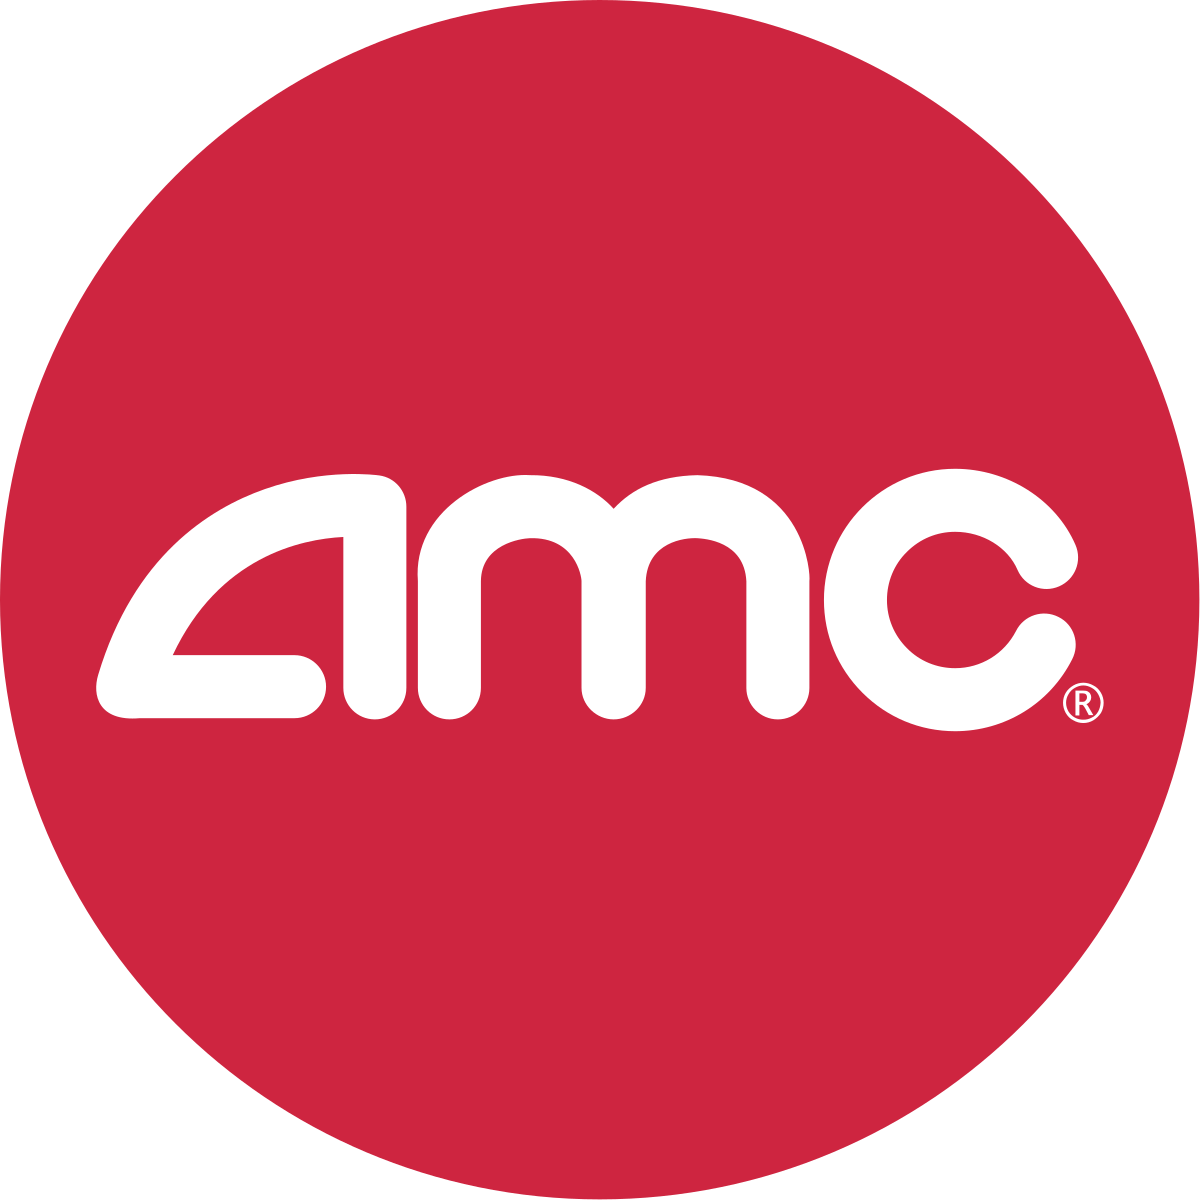 Chinese Conglomerate Logo - AMC Theatres